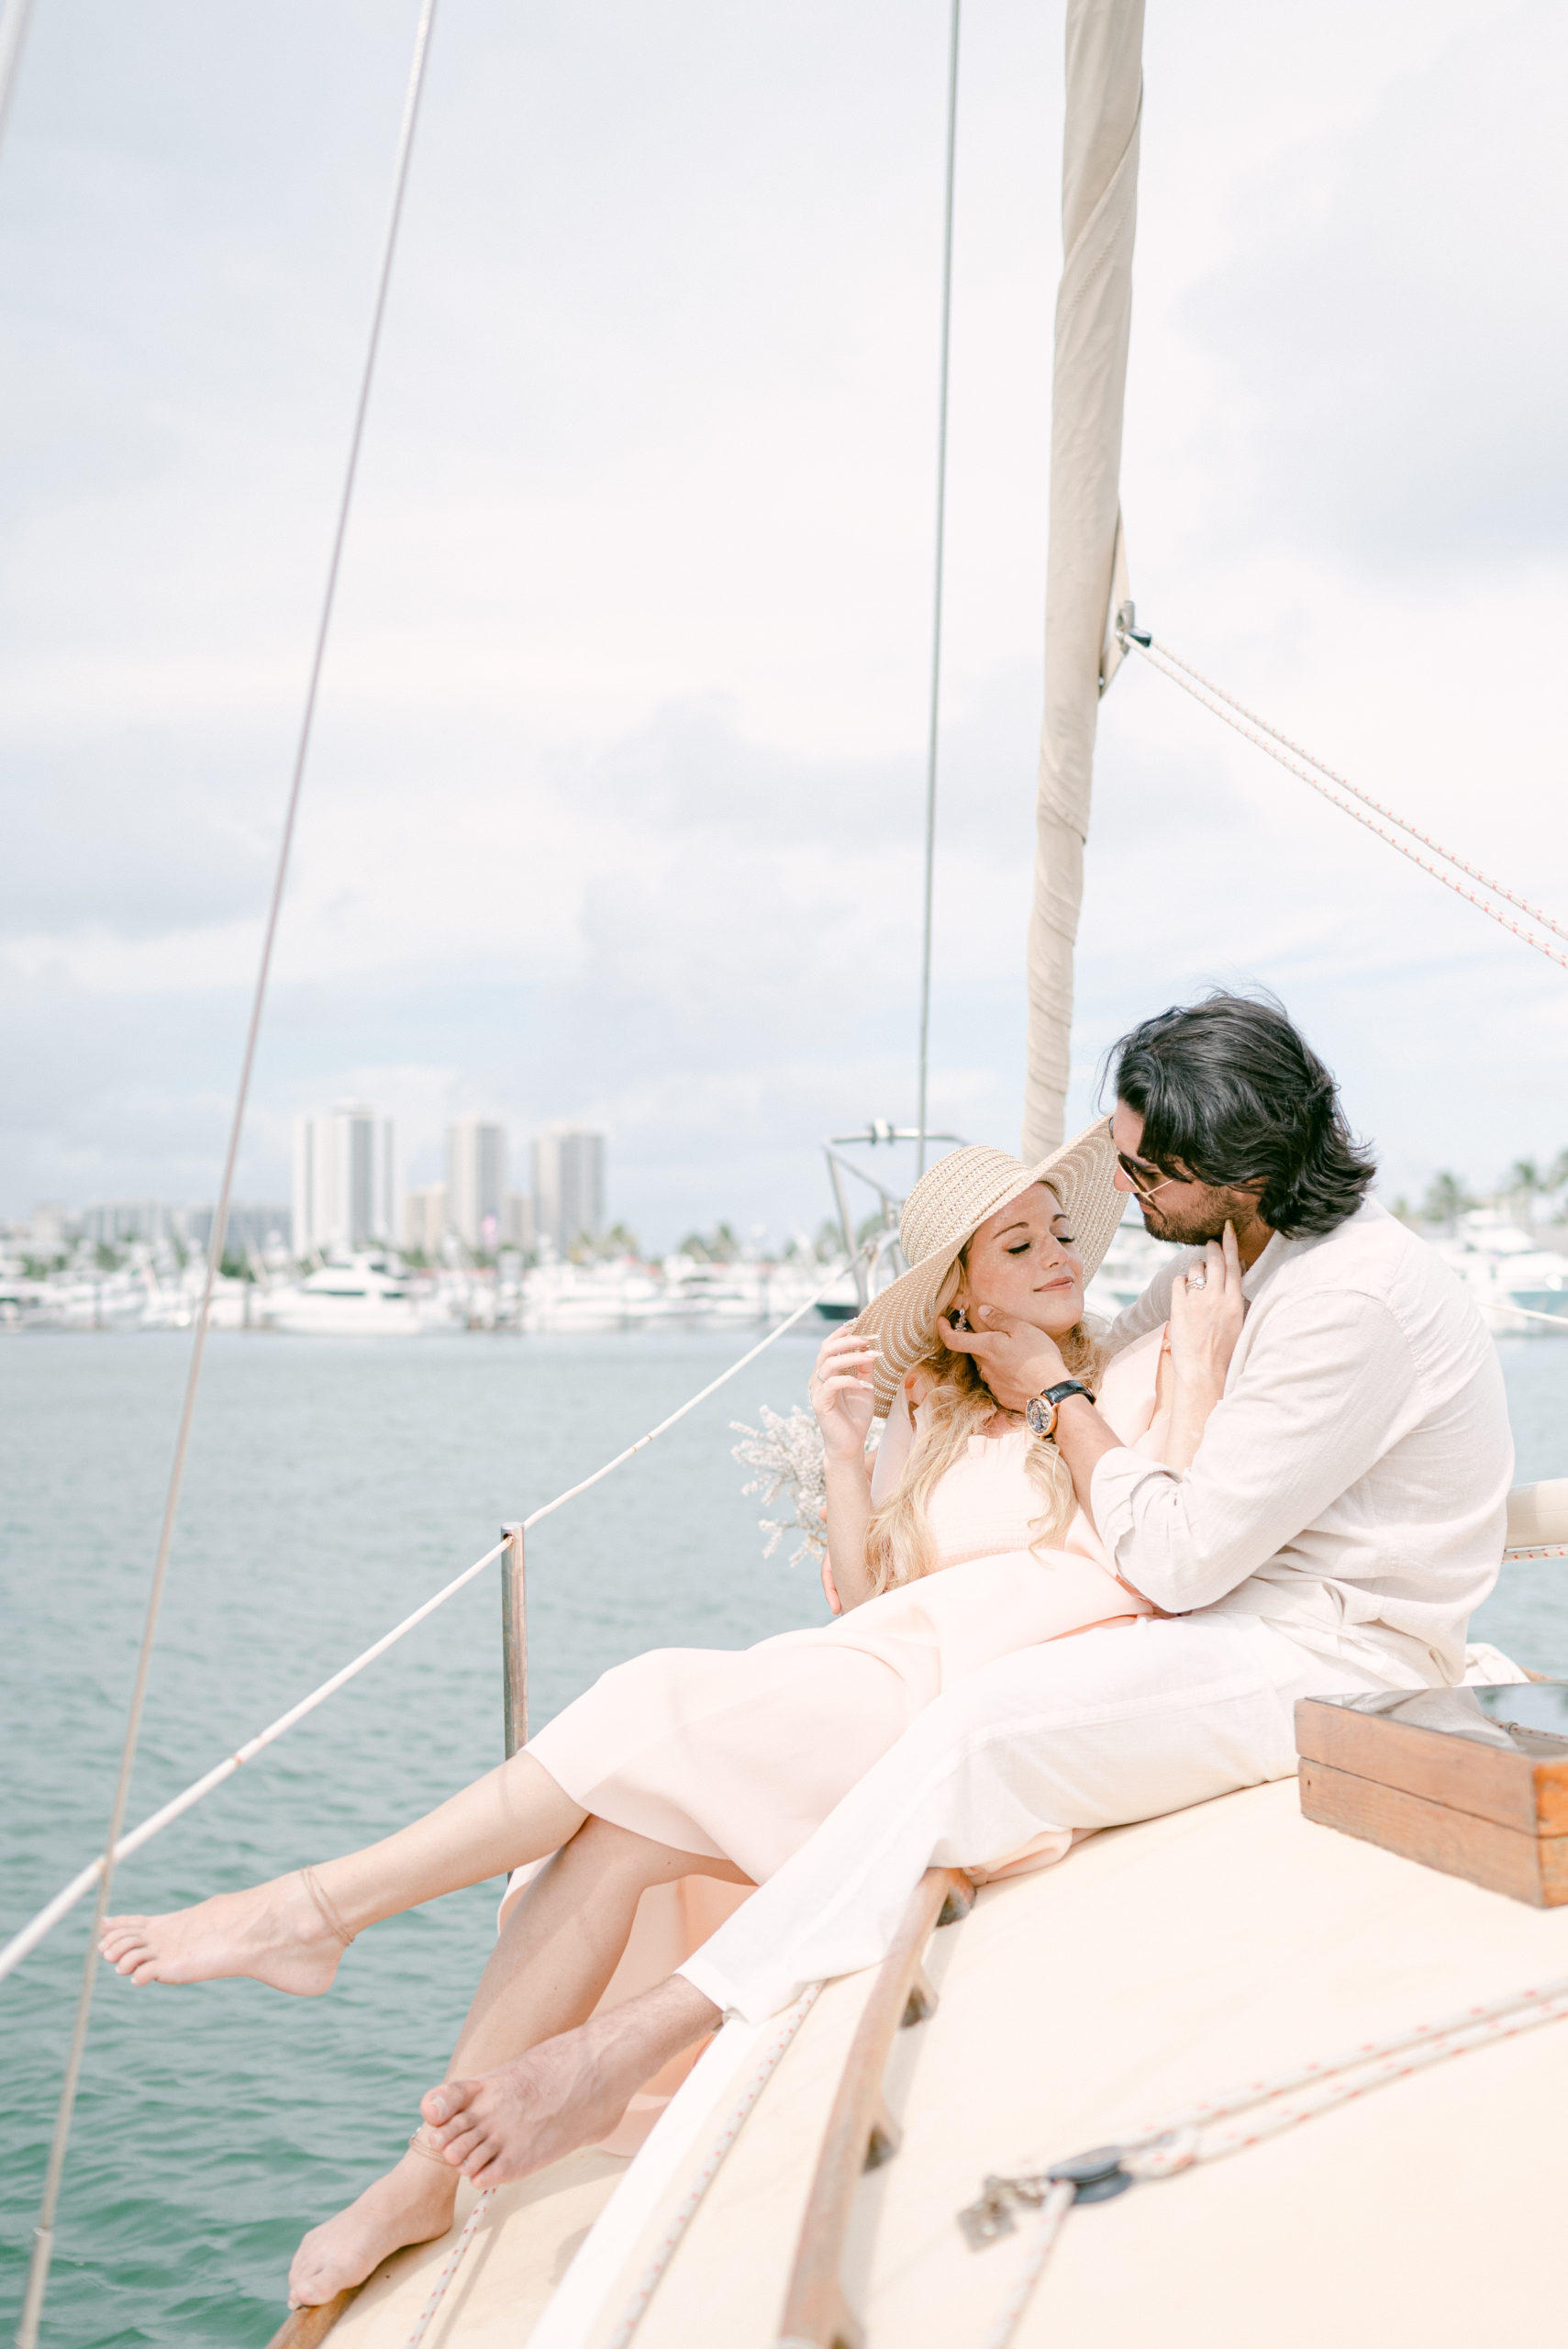 Engagement session on a sailboat in South Florida